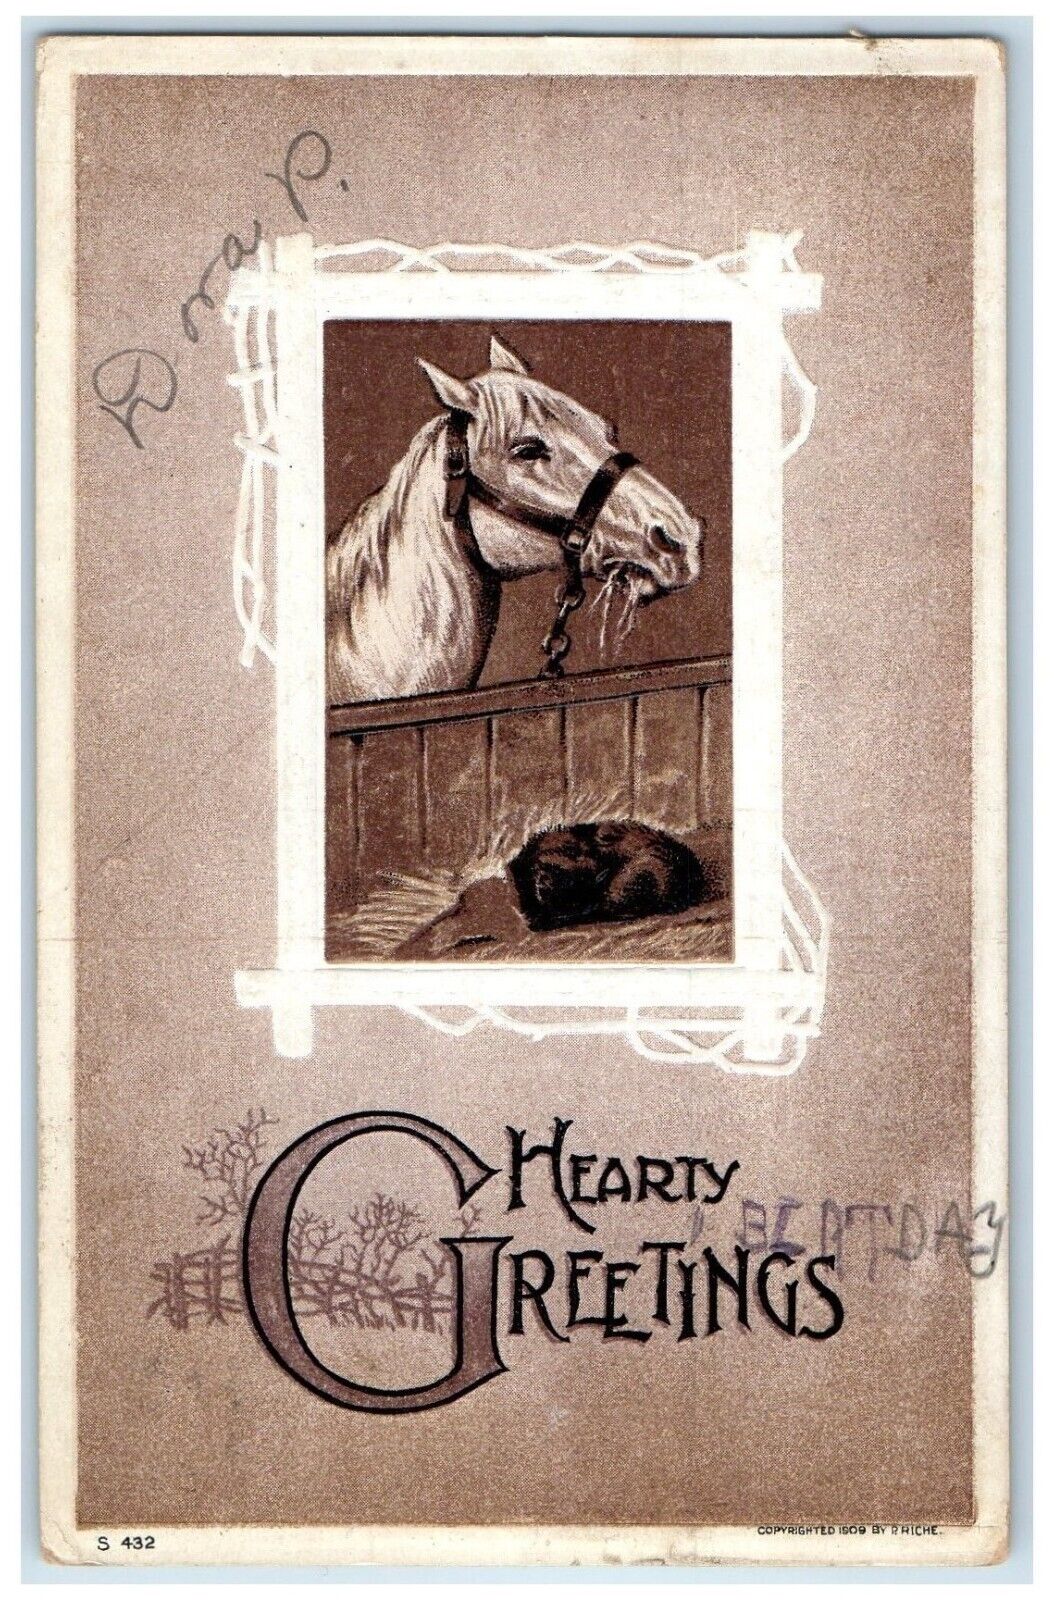 1910 Hearty Greetings Omega Florida FL, Horse Barn Embossed Antique Postcard